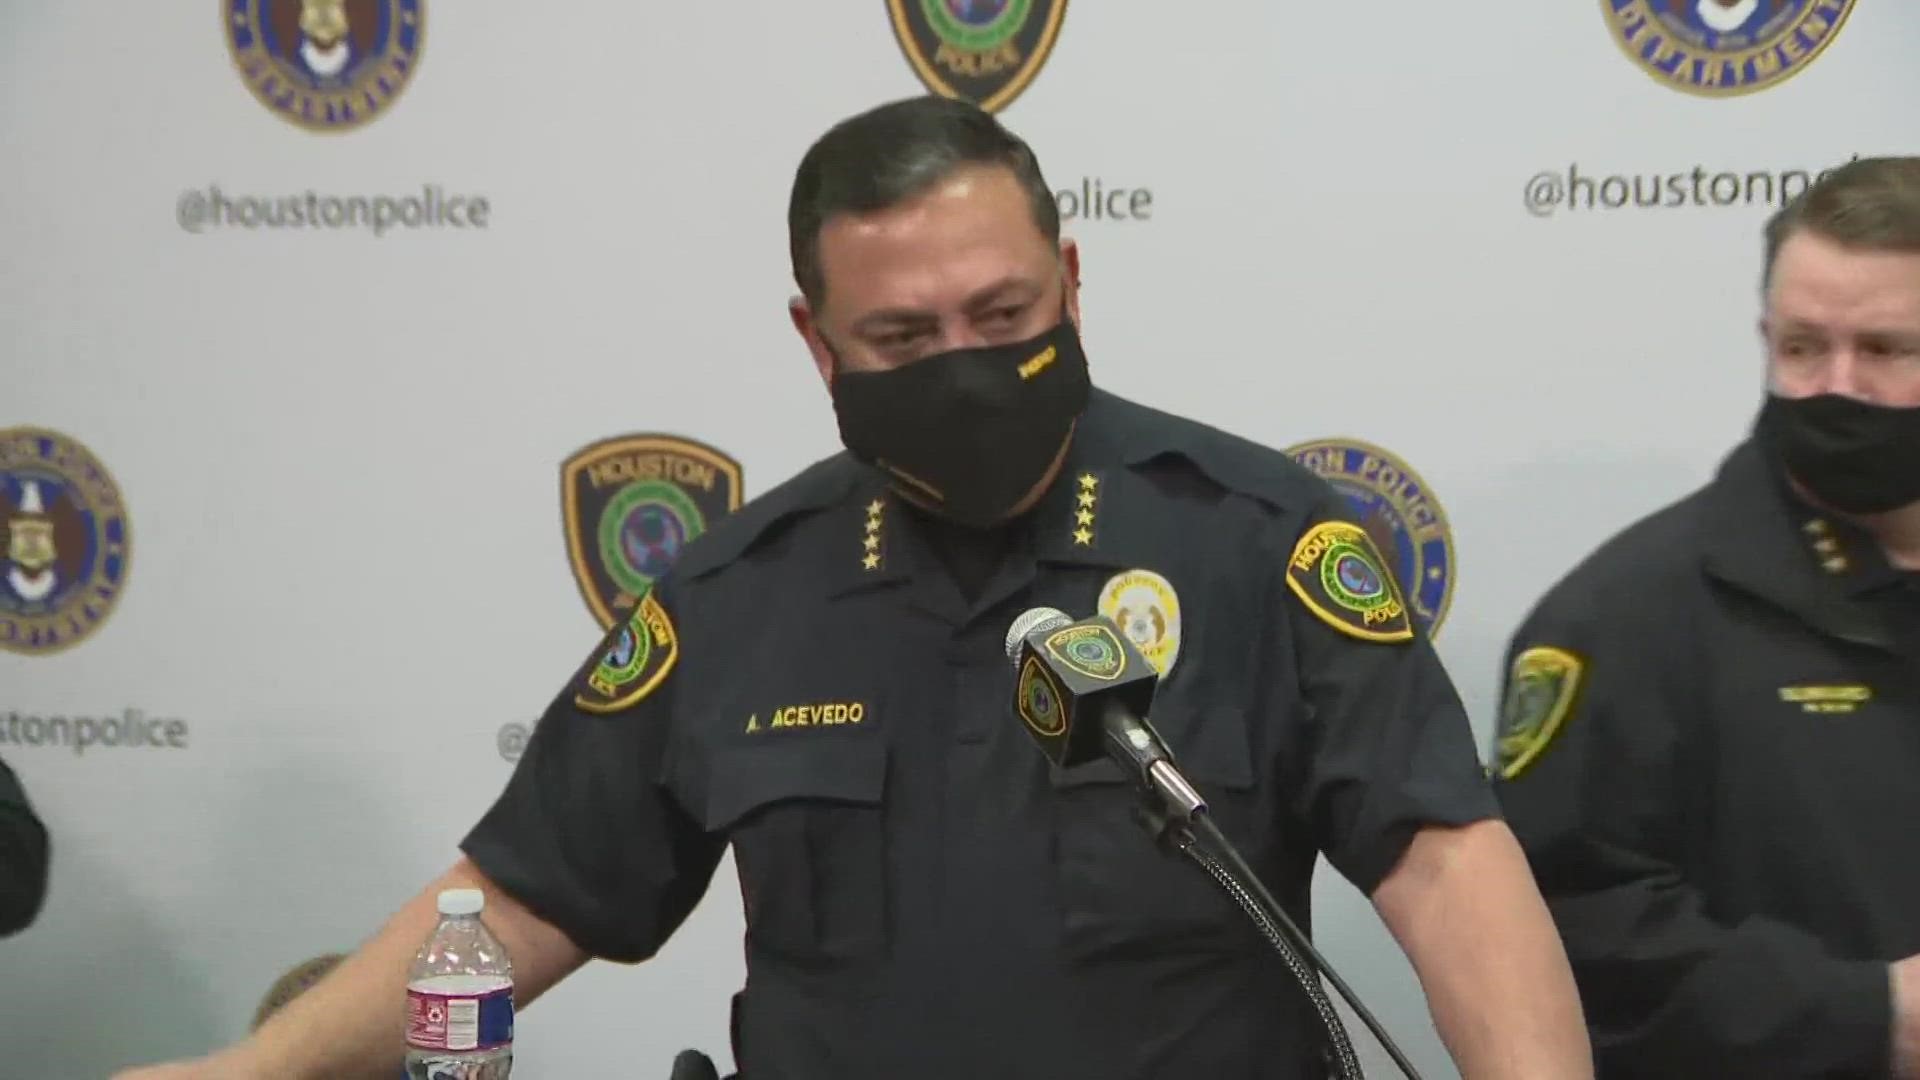 Houston Police Chief Art Acevedo says they are beefing up police presence citywide in advance of the inauguration but there are no known threats to the Houston area.